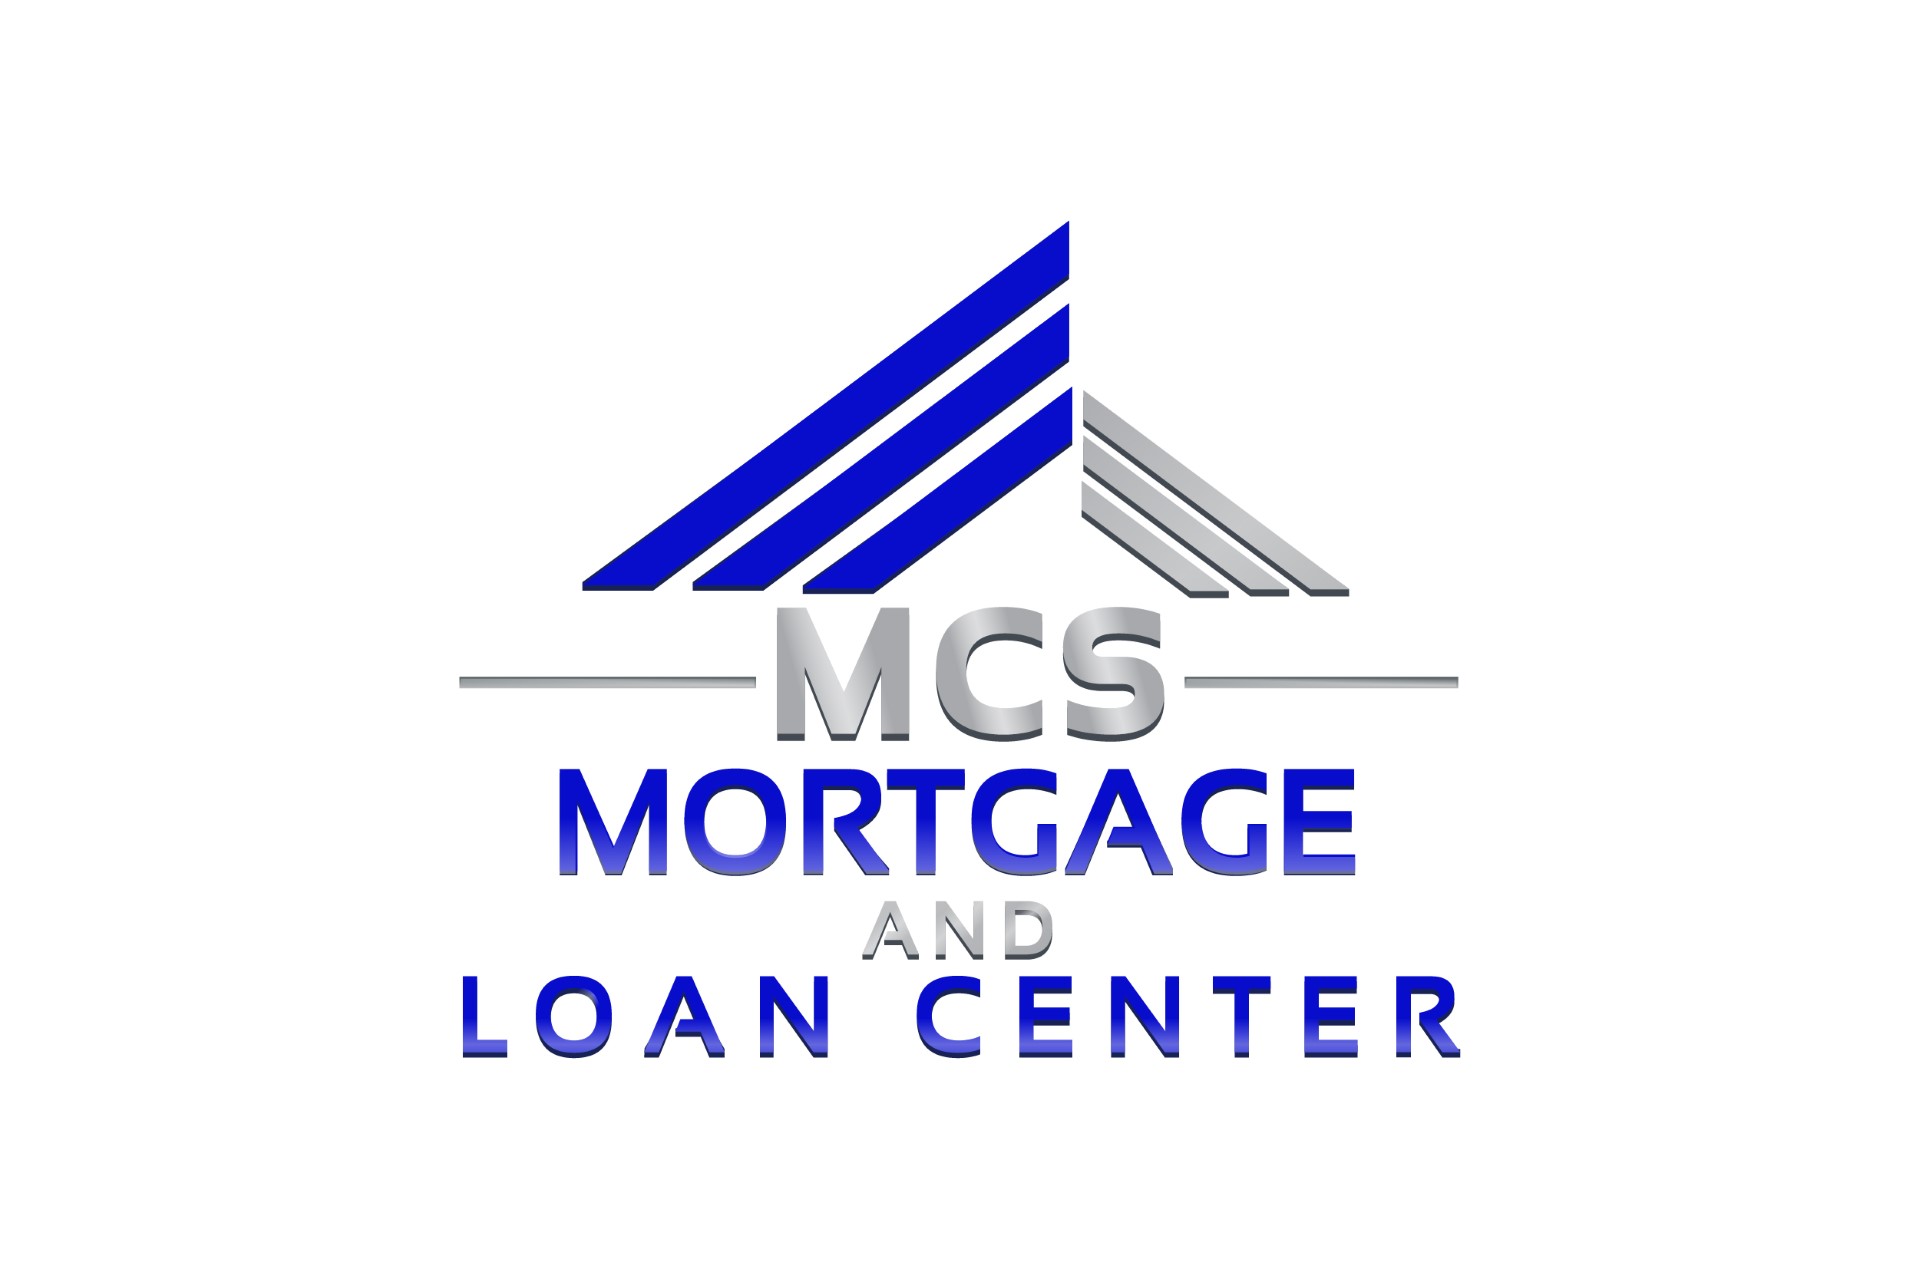 The Mortgage and loan center logo at Montgomery, AL.